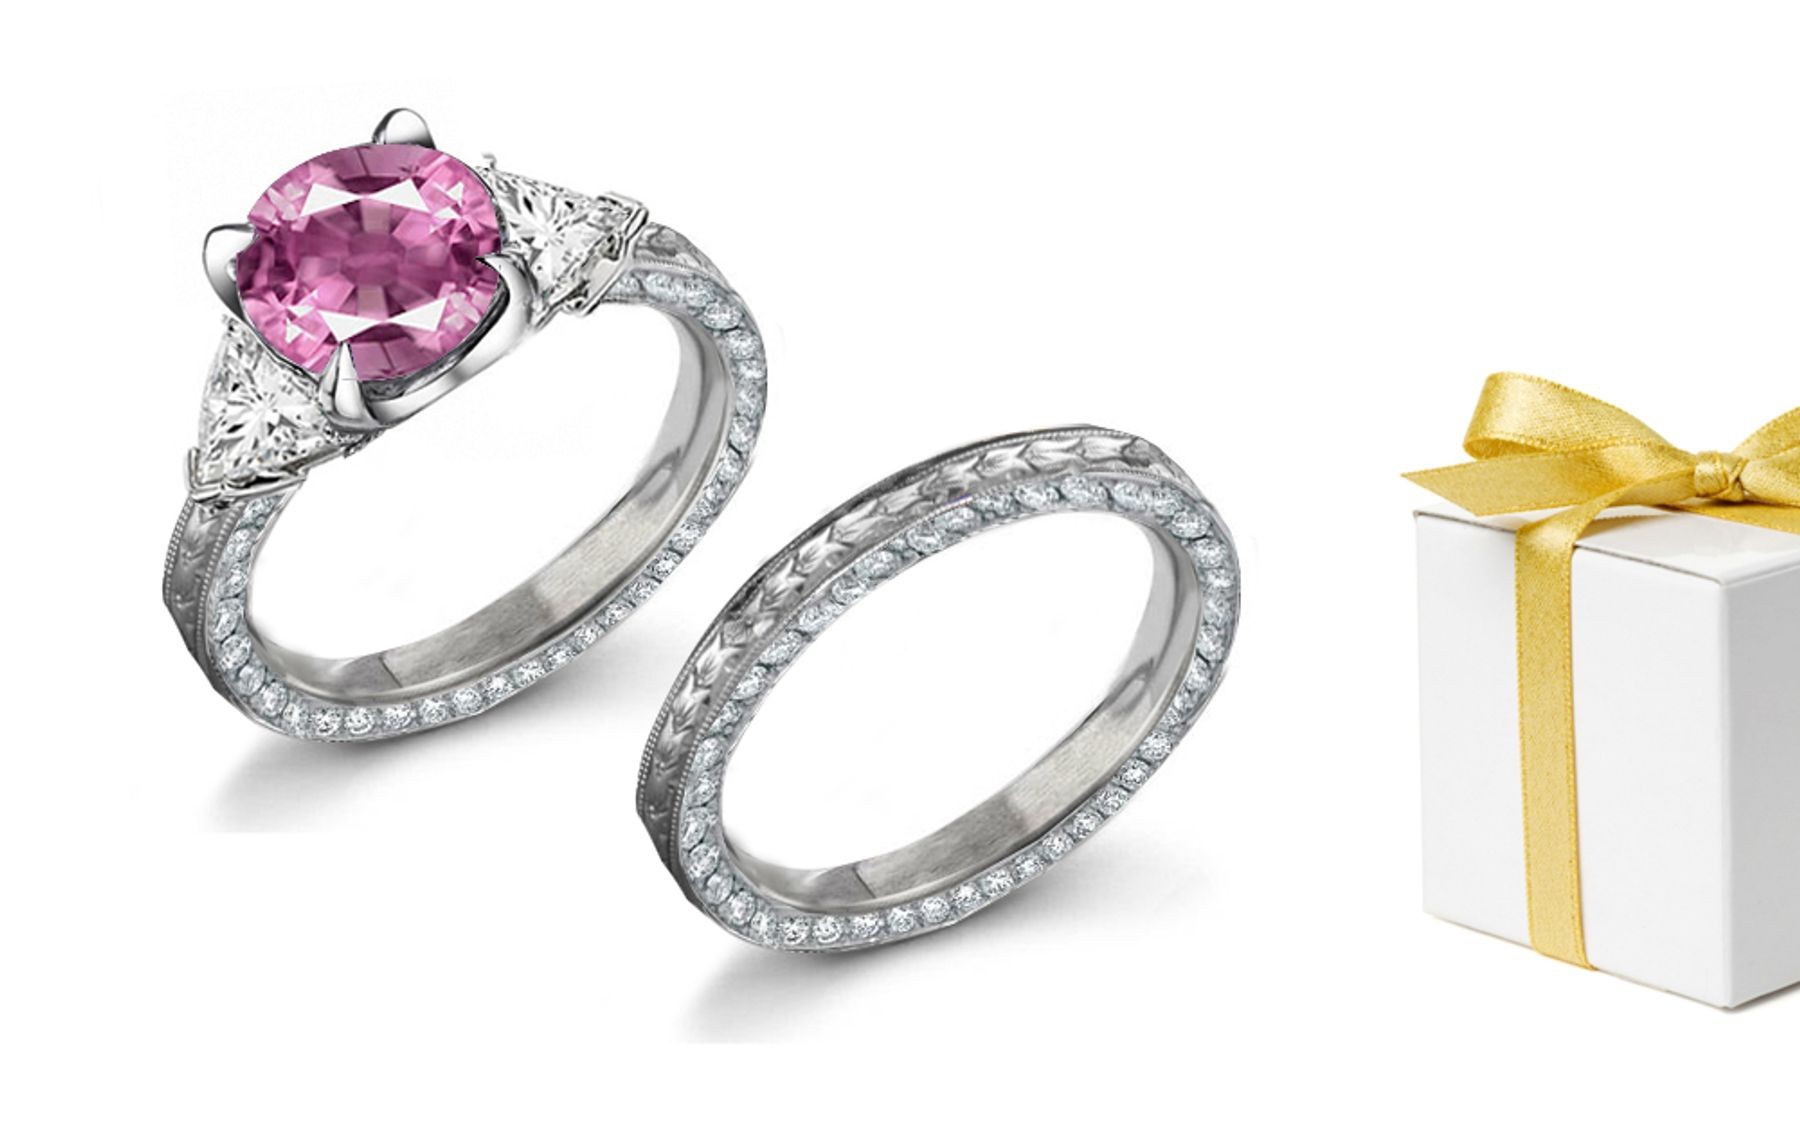 Delight: Engraved Pink Sapphire & Diamond Ring Availability: In stock